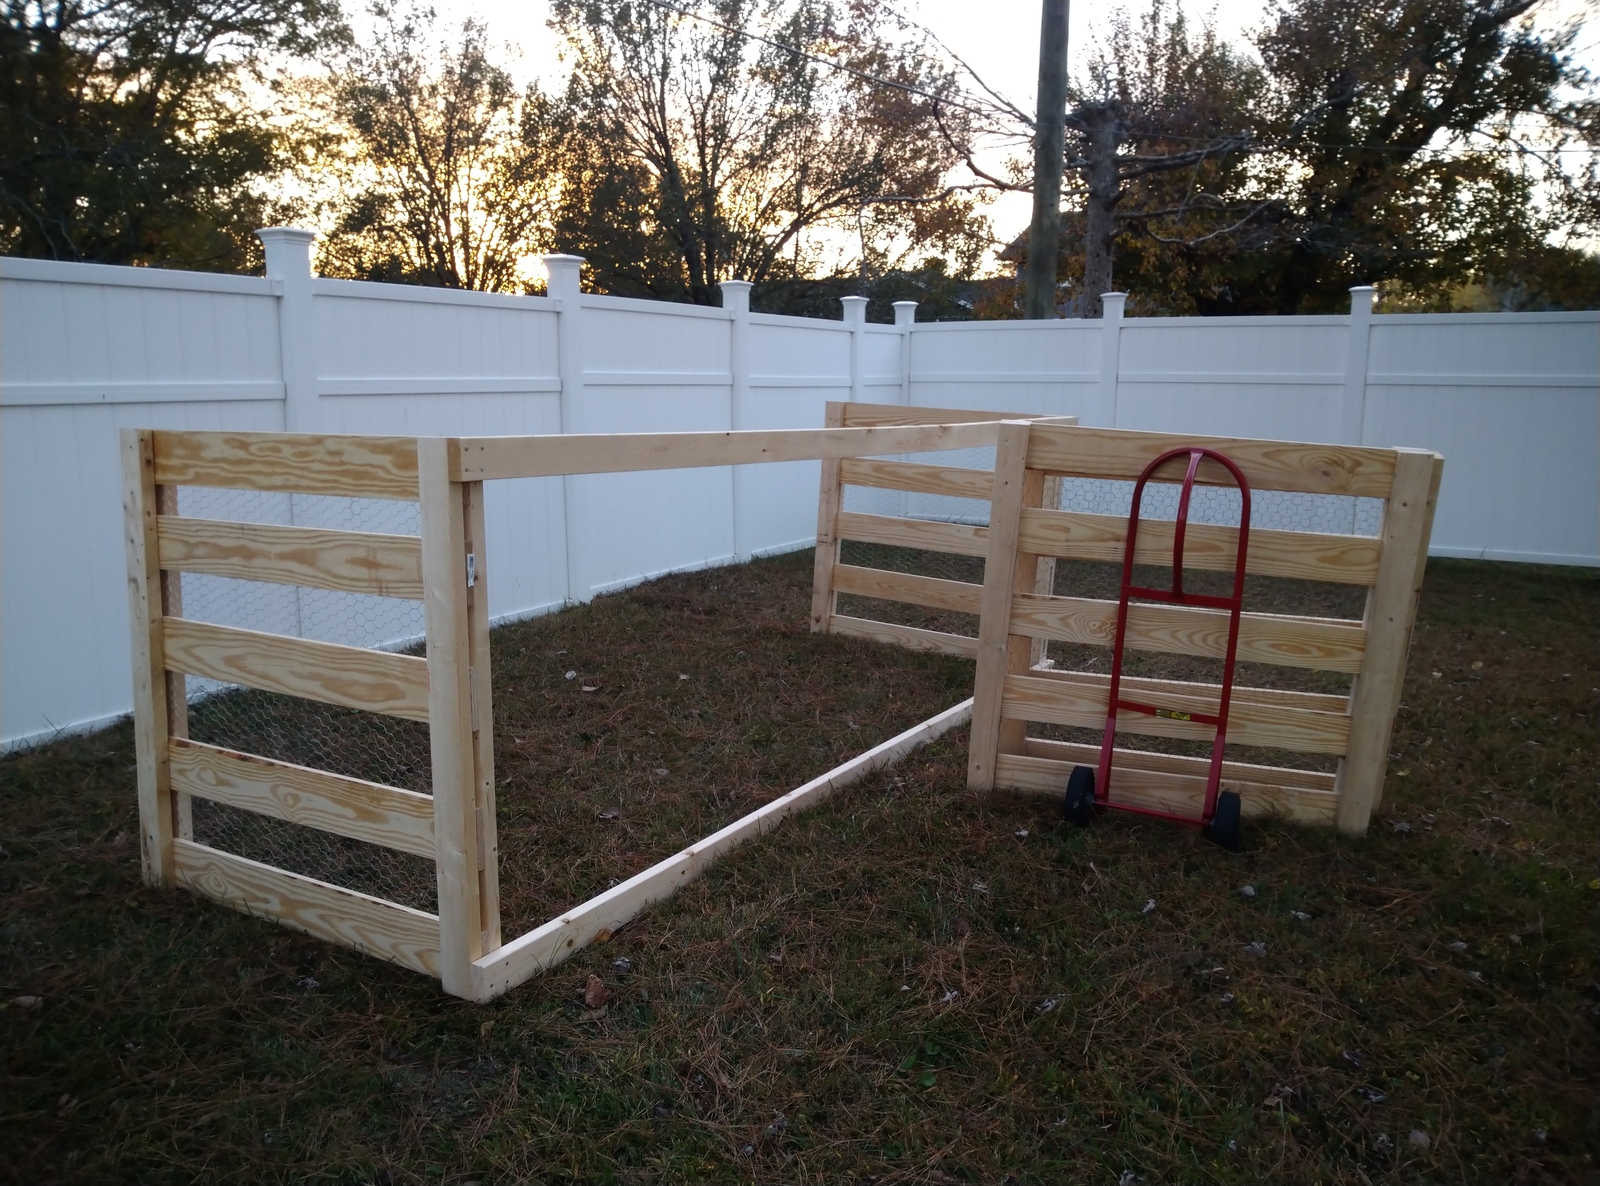 Walls with 2x4x12 holding them up and dividers on a hand truck